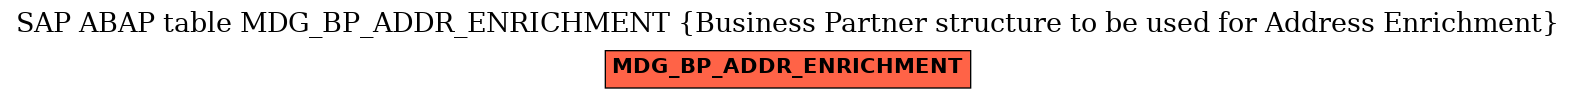 E-R Diagram for table MDG_BP_ADDR_ENRICHMENT (Business Partner structure to be used for Address Enrichment)